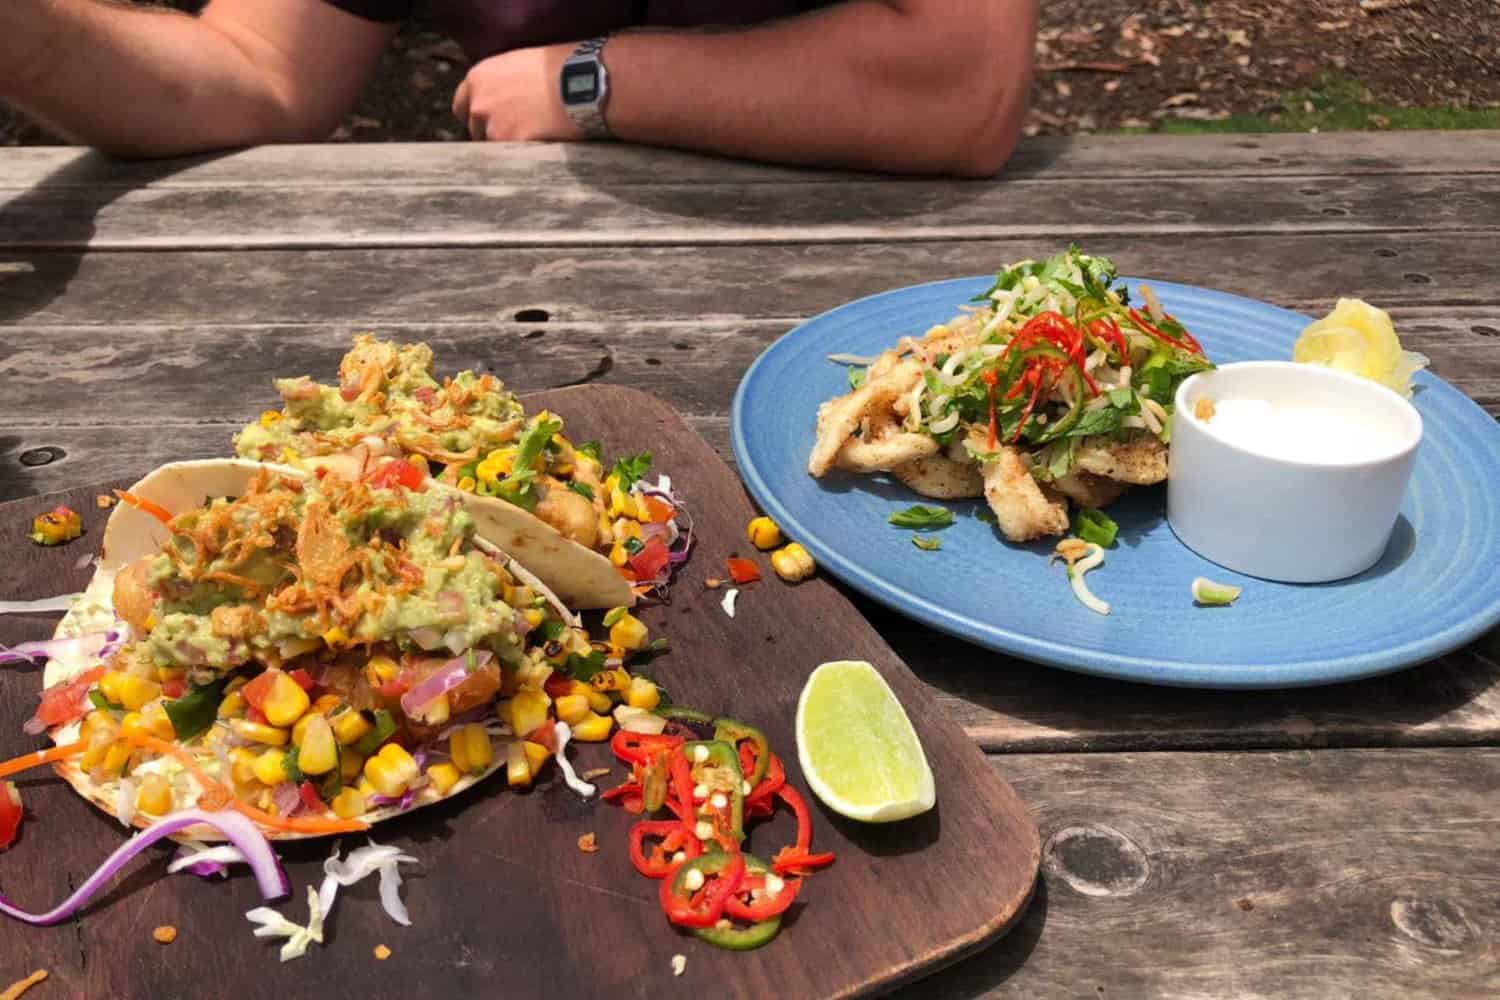 Deliciously plated tacos and squid served at a brewery in Margaret River, with colorful toppings and sauces complementing the dishes' aroma.